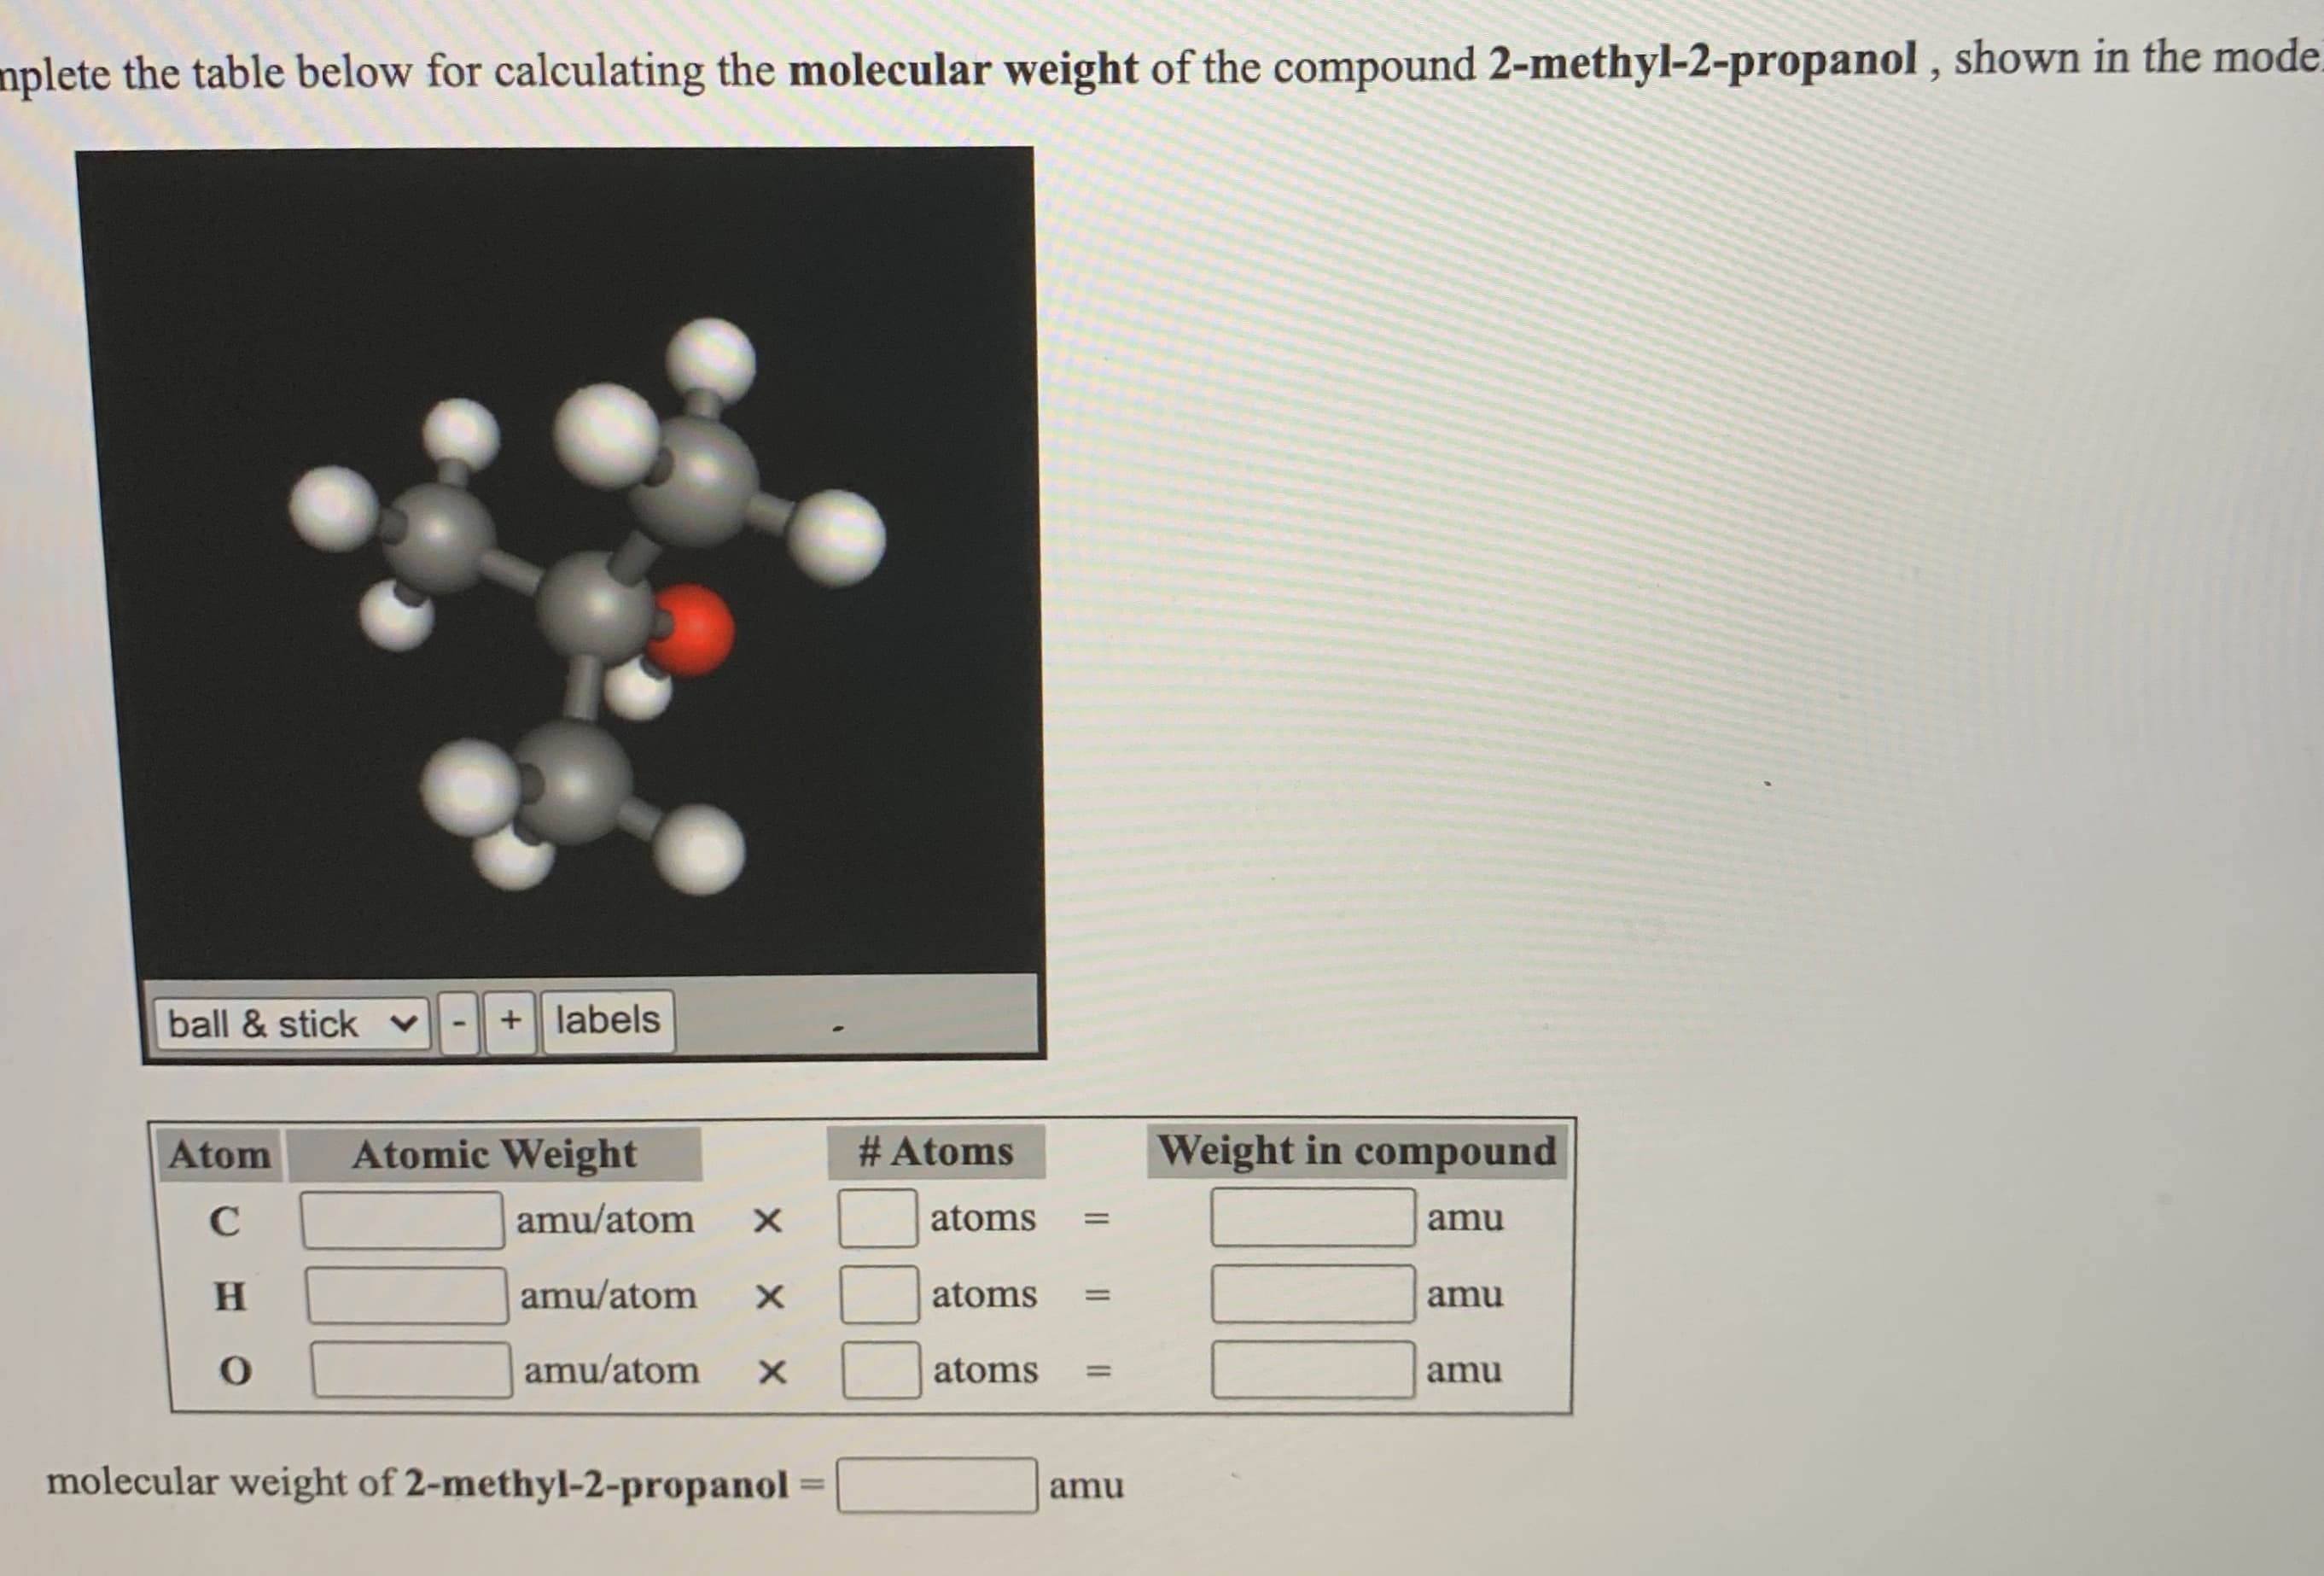 nplete the table below for calculating the molecular weight of the compound 2-methyl-2-propanol , shown in the mod
ball & stick v
+ labels
Atom
Atomic Weight
# Atoms
Weight in compound
C
amu/atom
atoms
amu
%3D
H.
amu/atom
atoms
amu
%3D
amu/atom
atoms
%3D
amu
molecular weight of 2-methyl-2-propanol
%3D
amu
